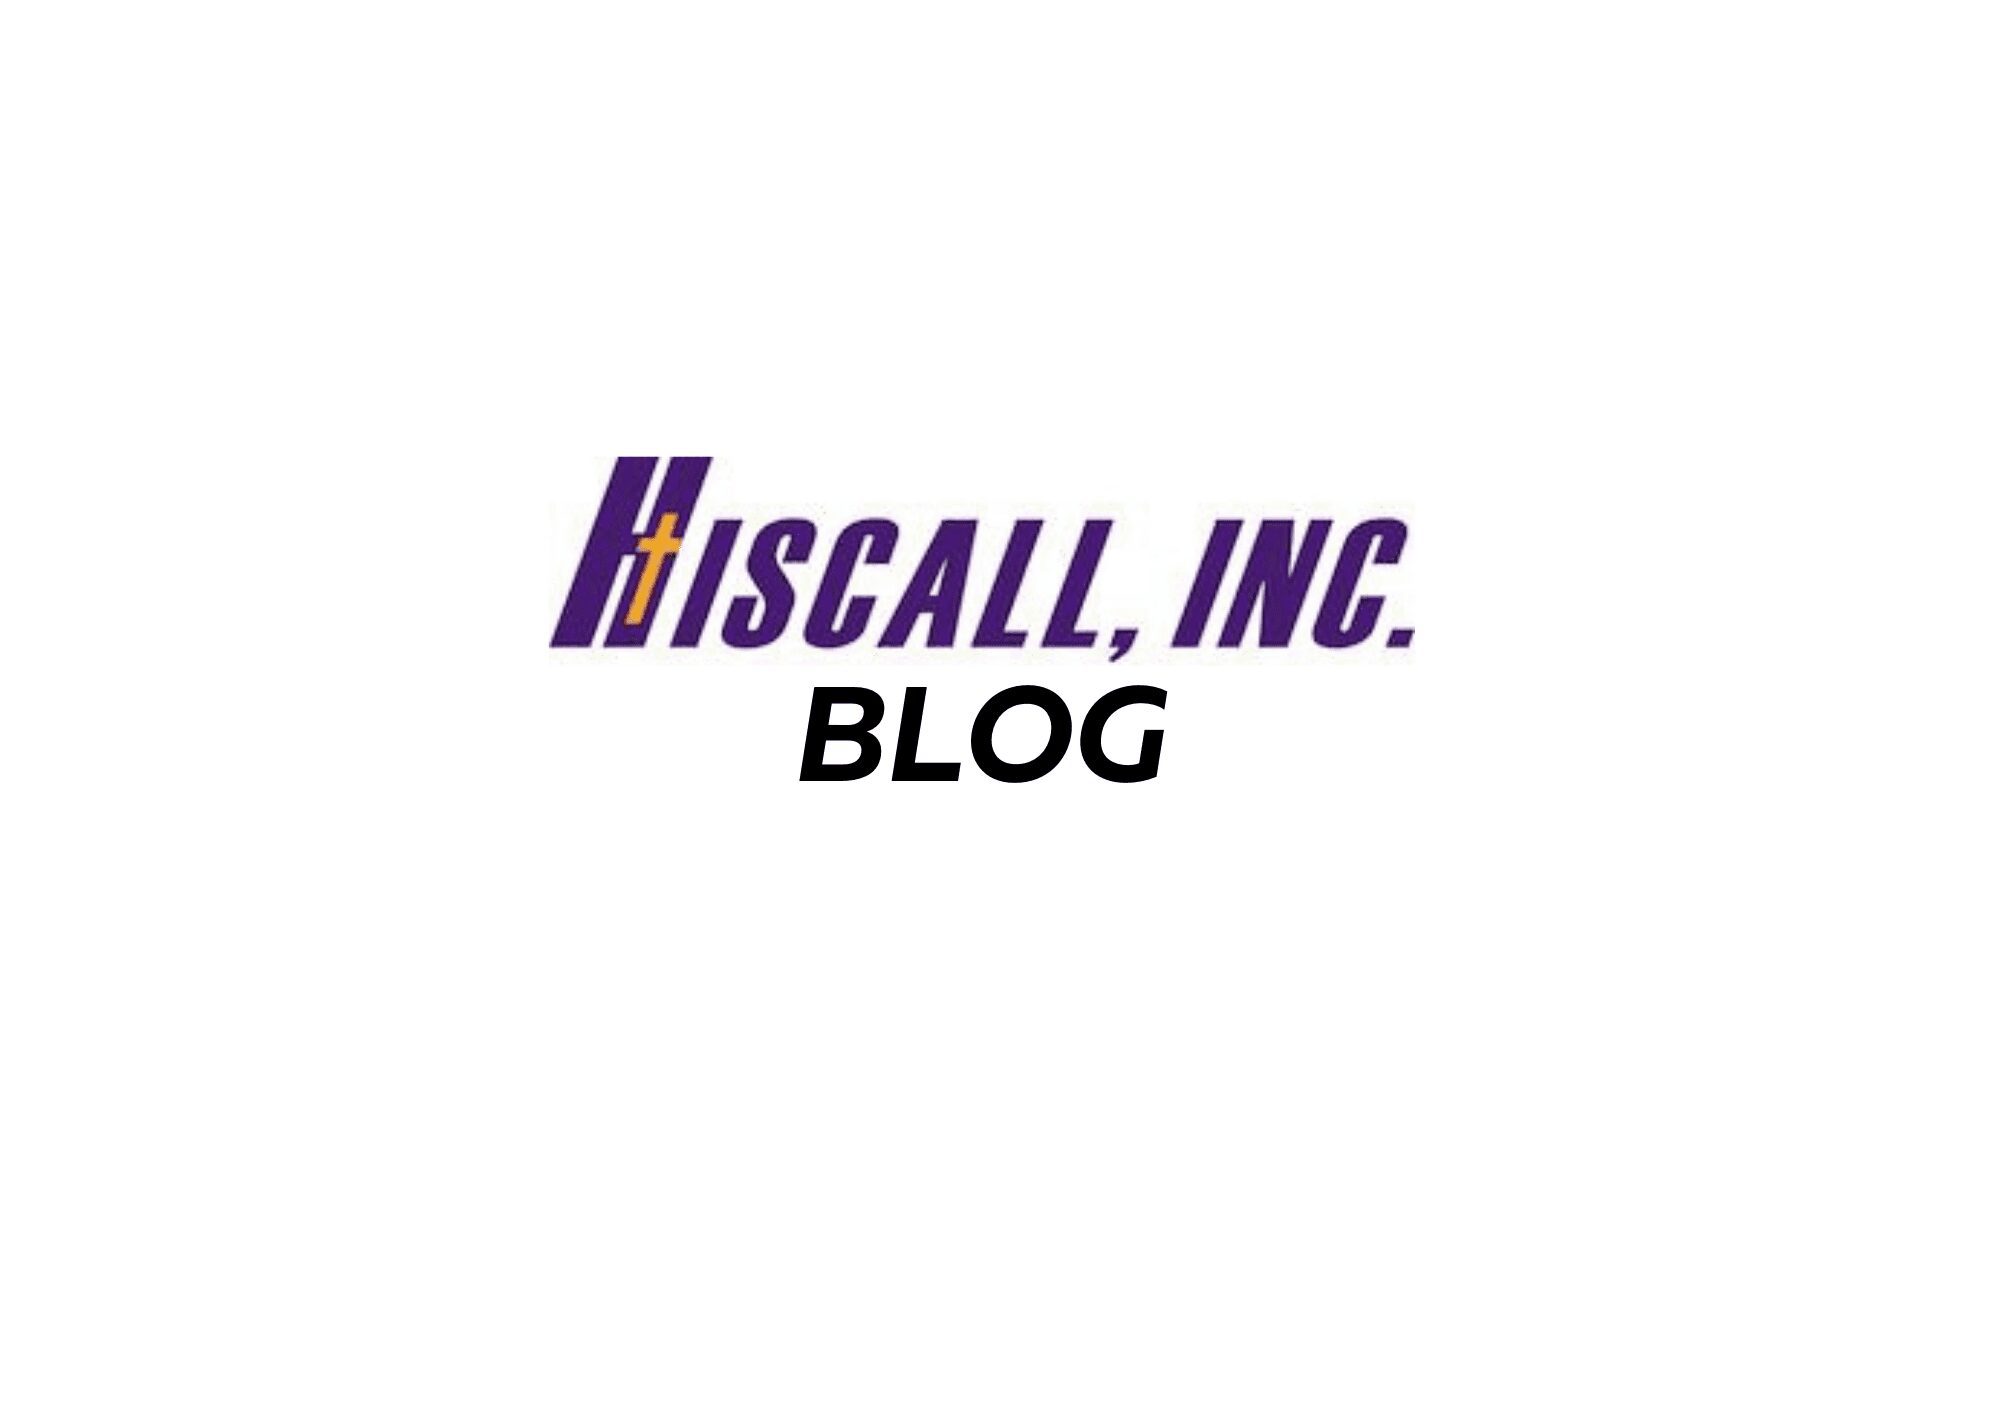 Knoxville Business Communications Center Opens – Hiscall, Inc. Celebrates The Knoxville Office Expansion And Relocation Open House